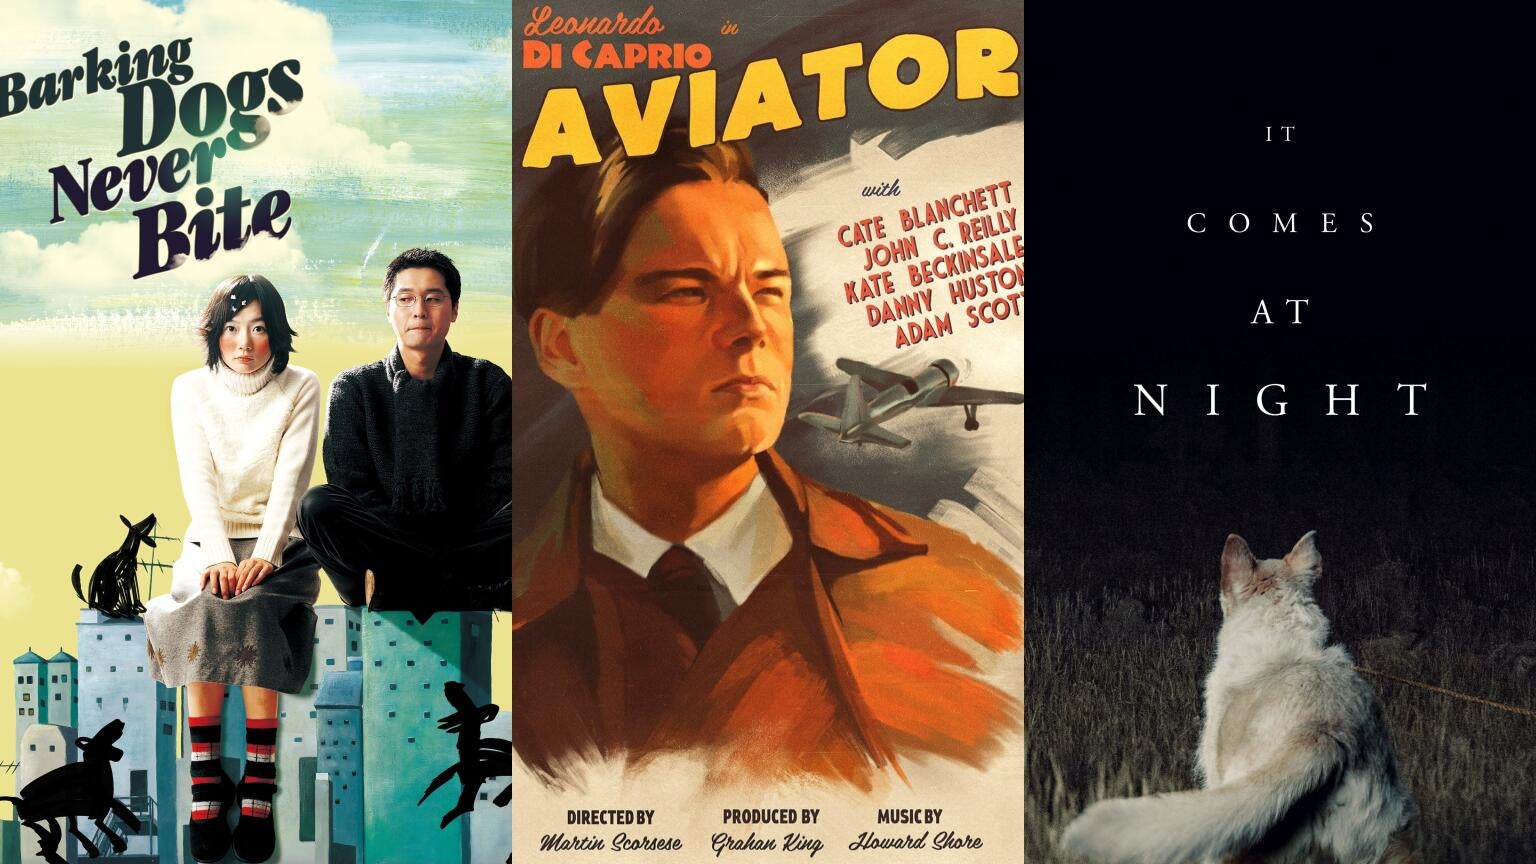 Posters for "Barking Dogs Don't Bite," "The Aviator," and "It Comes At Night"